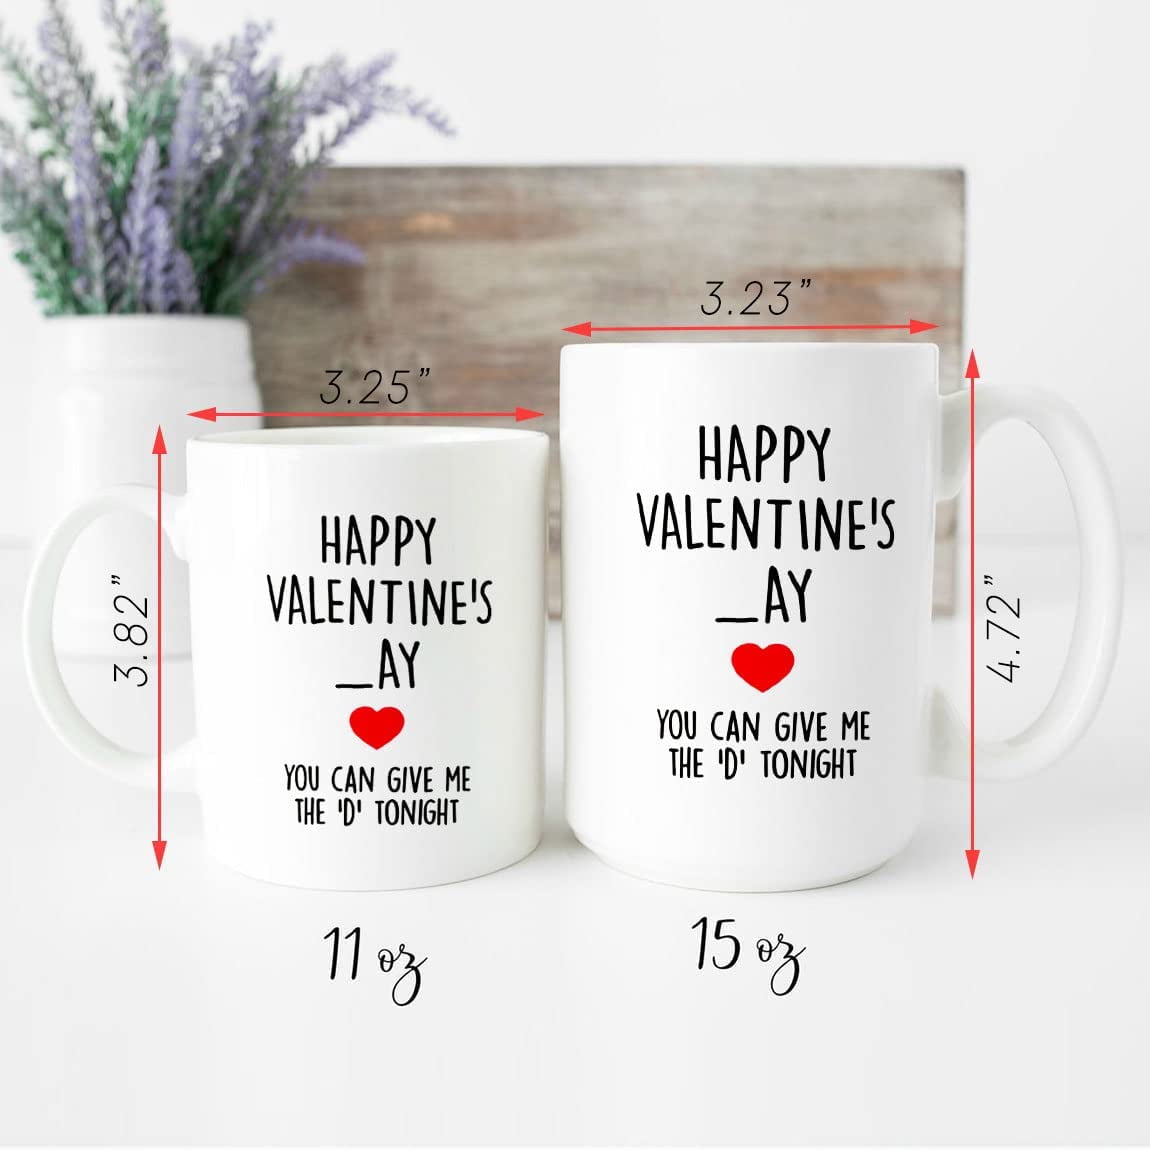 I Promise To Encourage, Personalized Mug, Valentine Gifts For Him, Gif -  PersonalFury